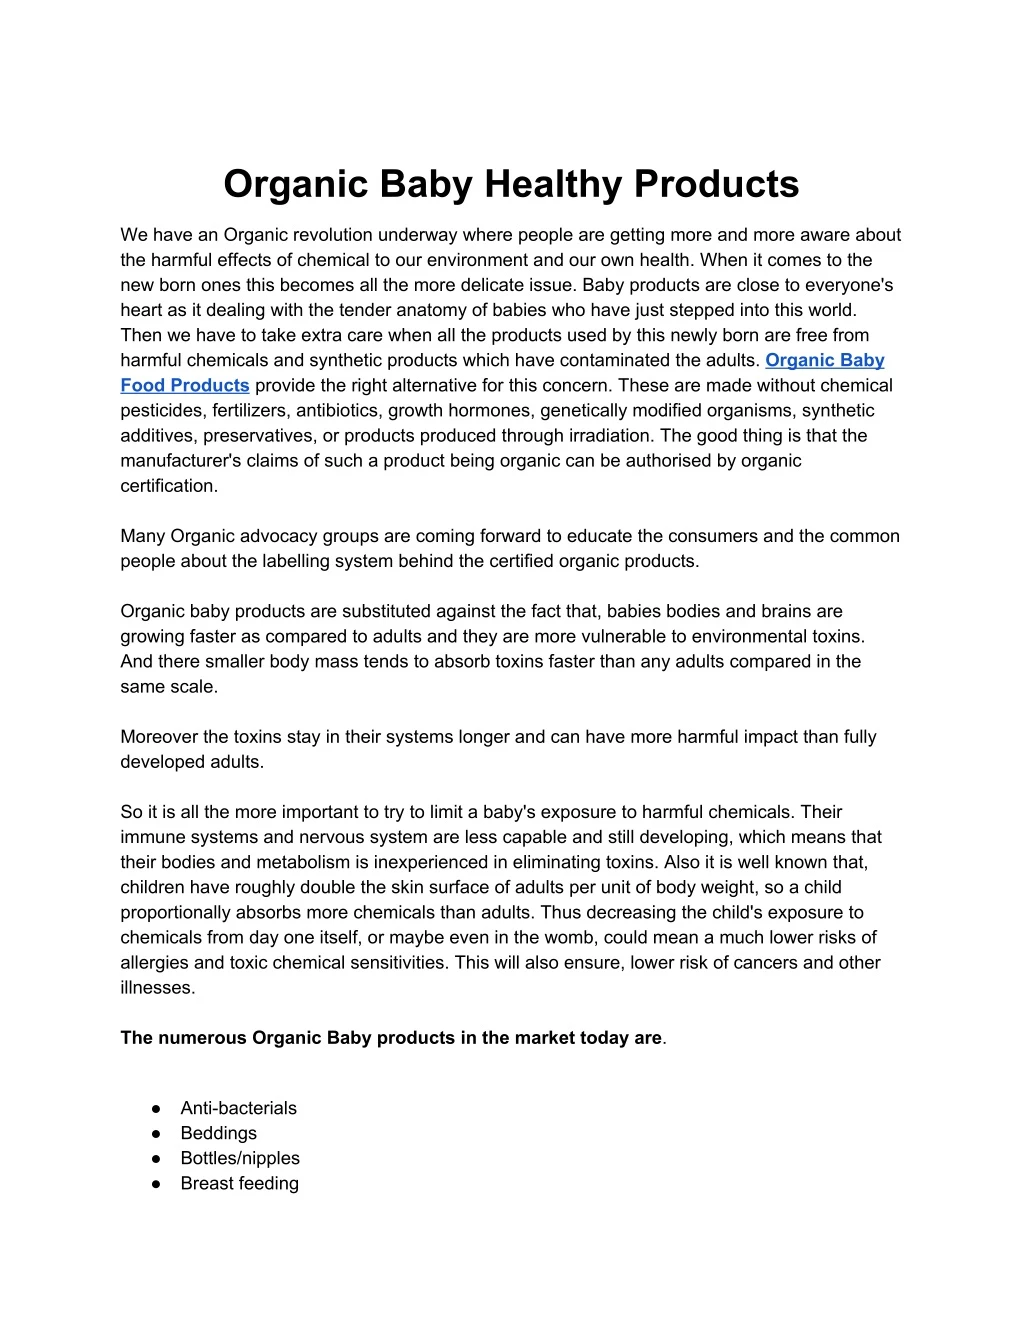 organic baby healthy products n.